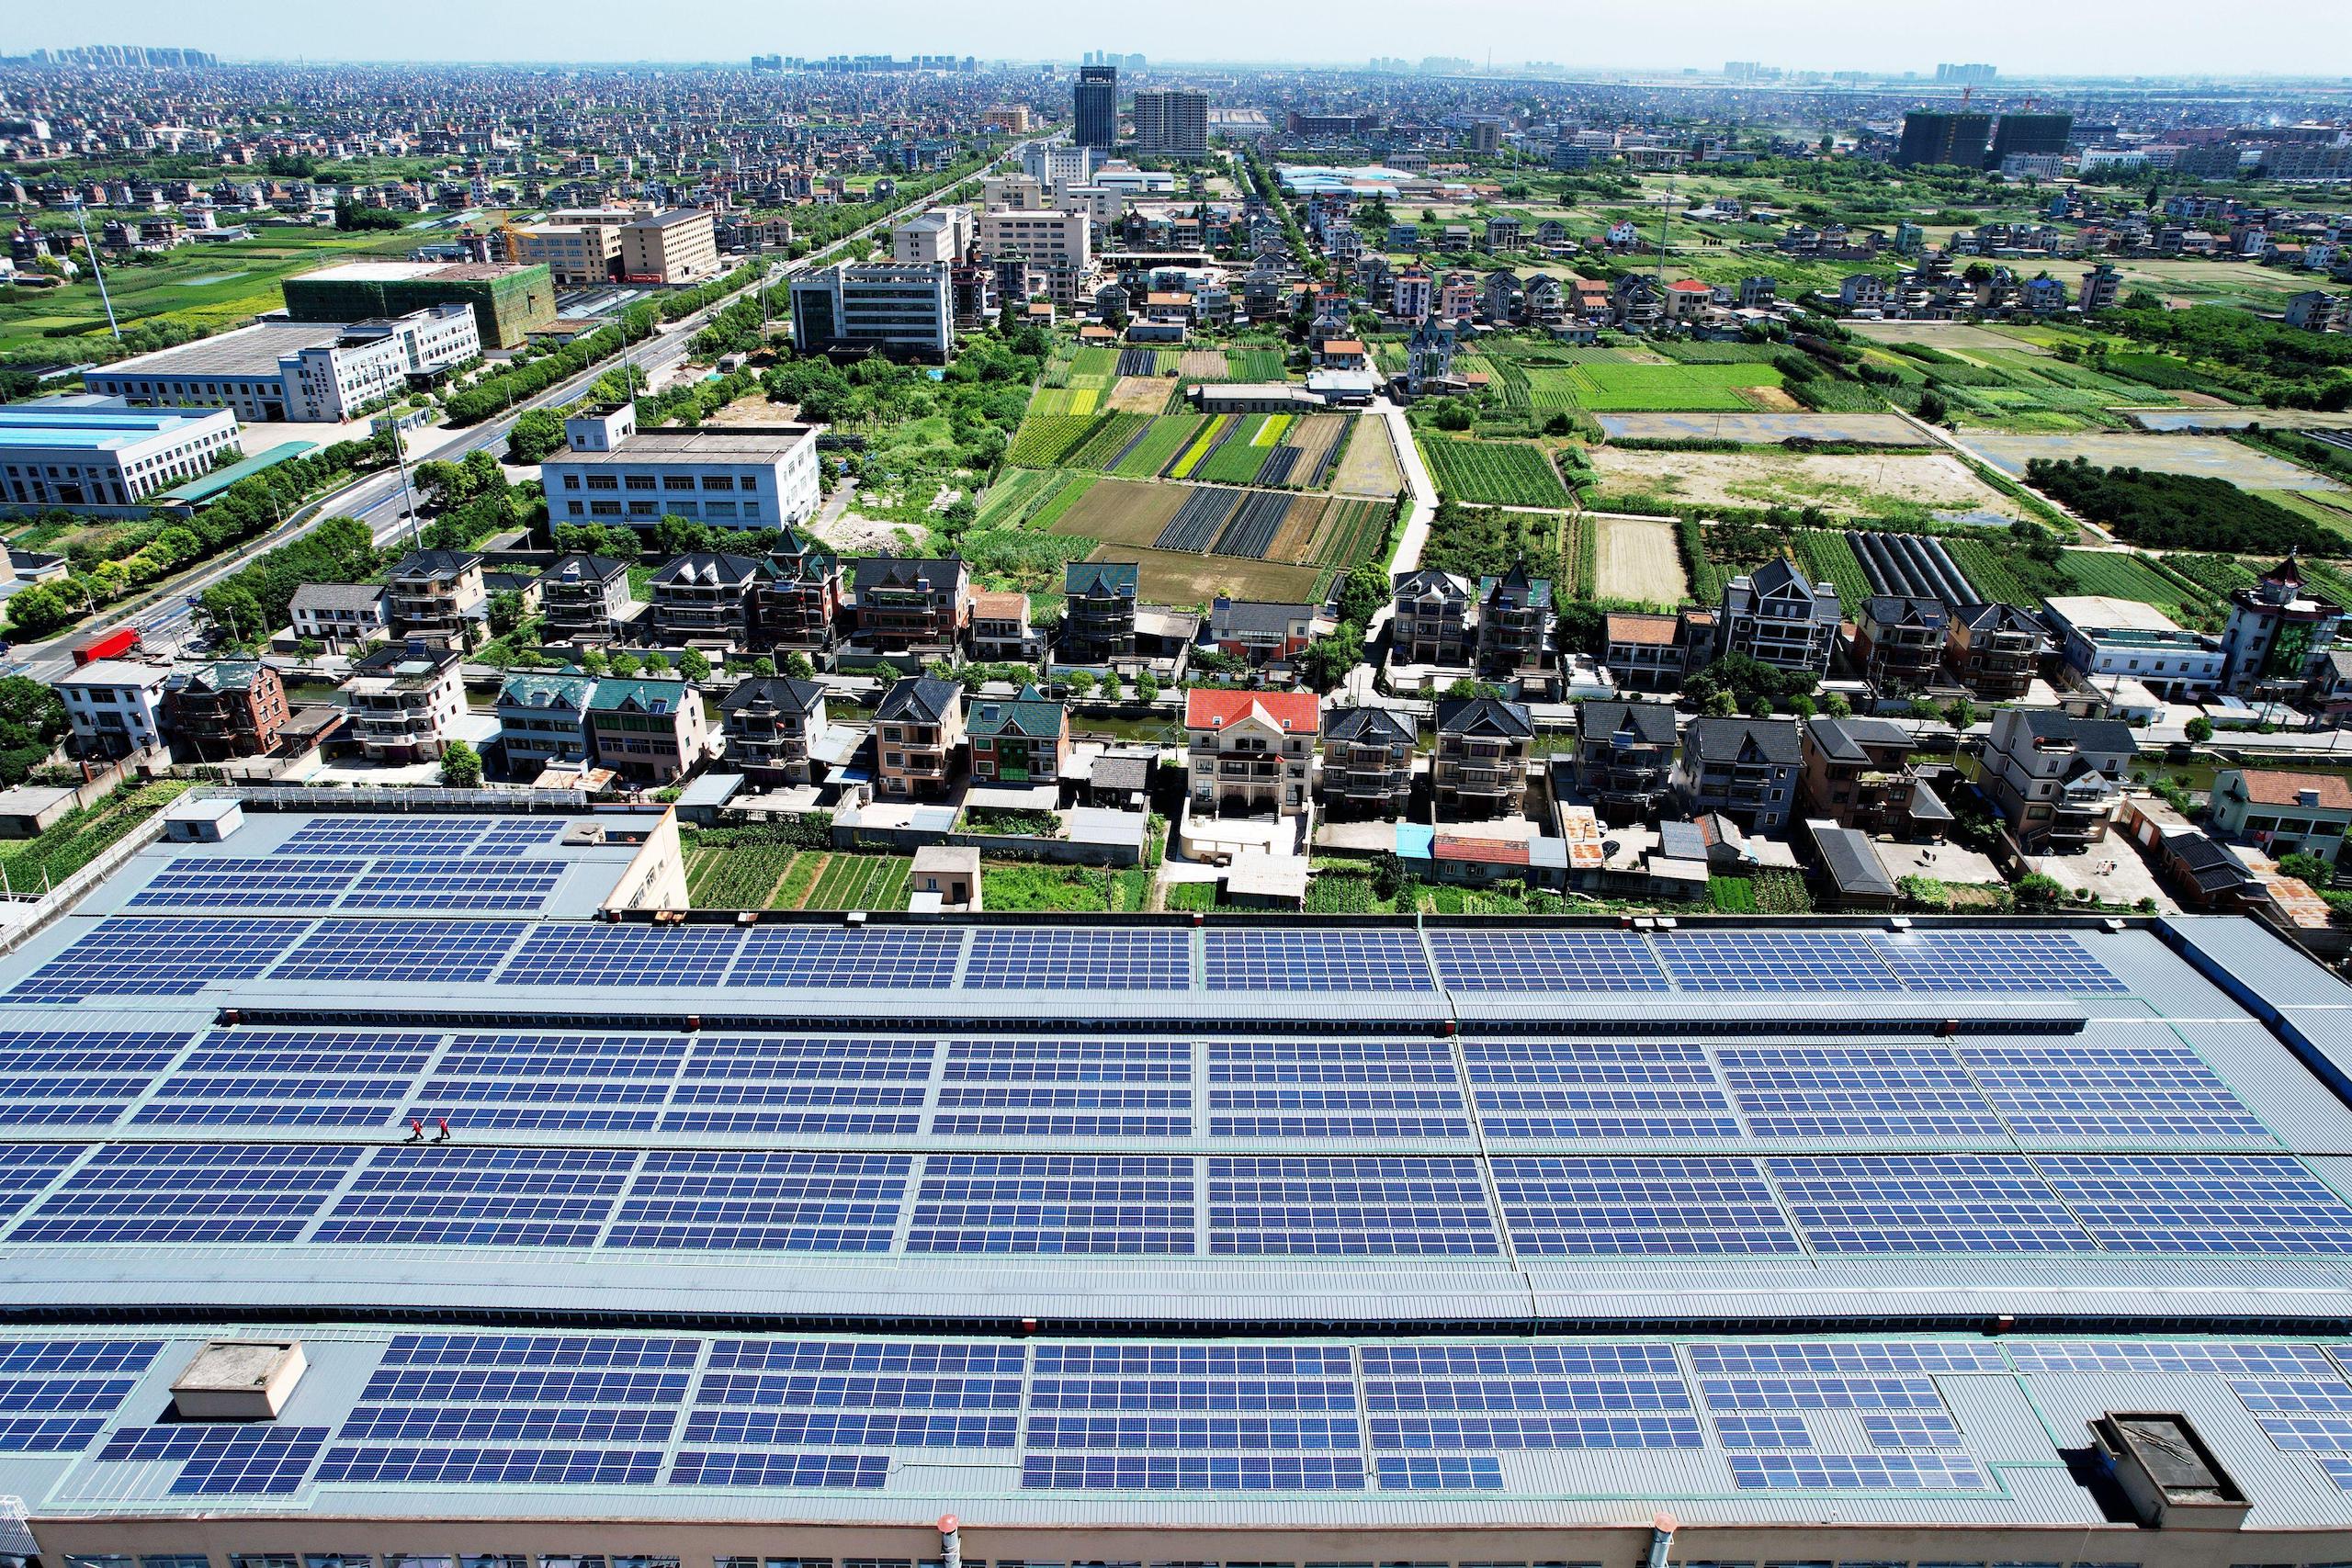 Hundreds of solar panels on the roof of a factory, aerial photo, Chinese small town countryside view in background, green rice fields and mid-rise buildings